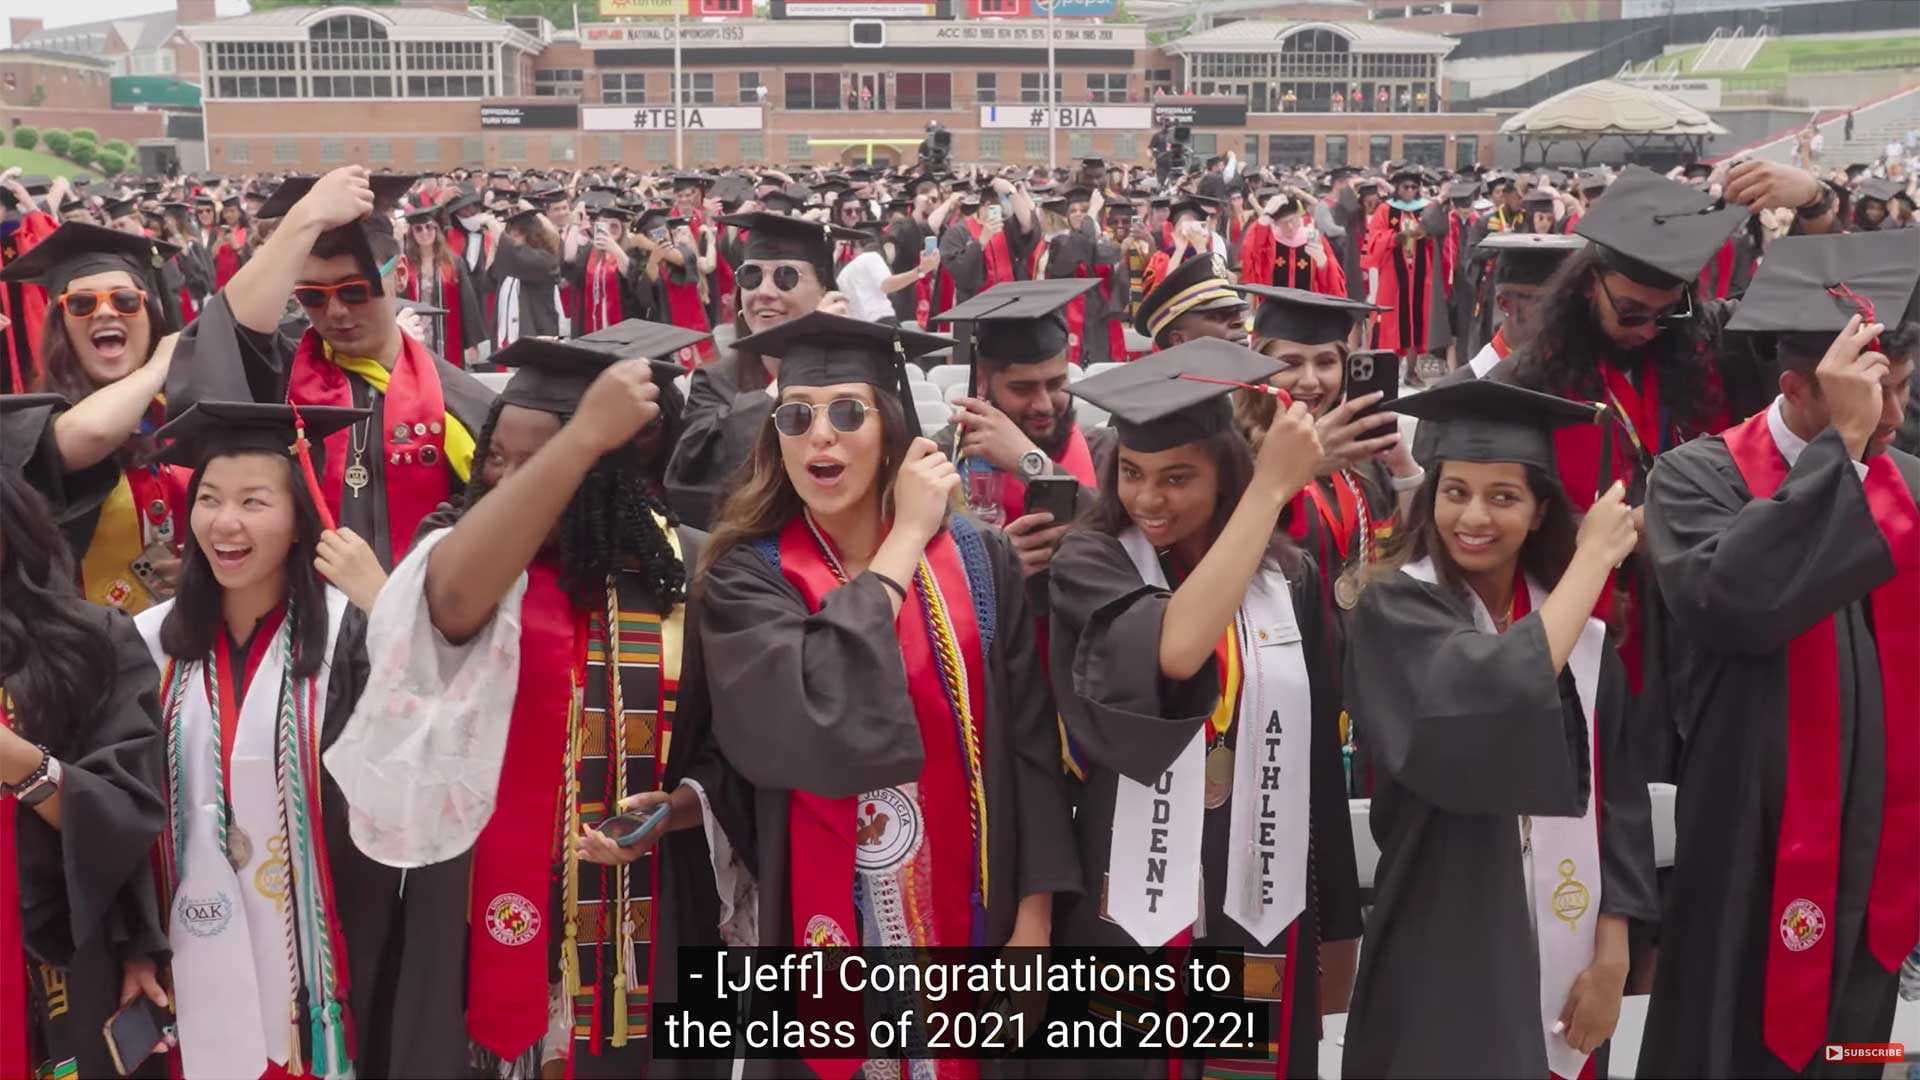 Screengrab from UMD's commencement video with caption reading: "[Jeff] Congratulations to the class of 2021 and 2022!"